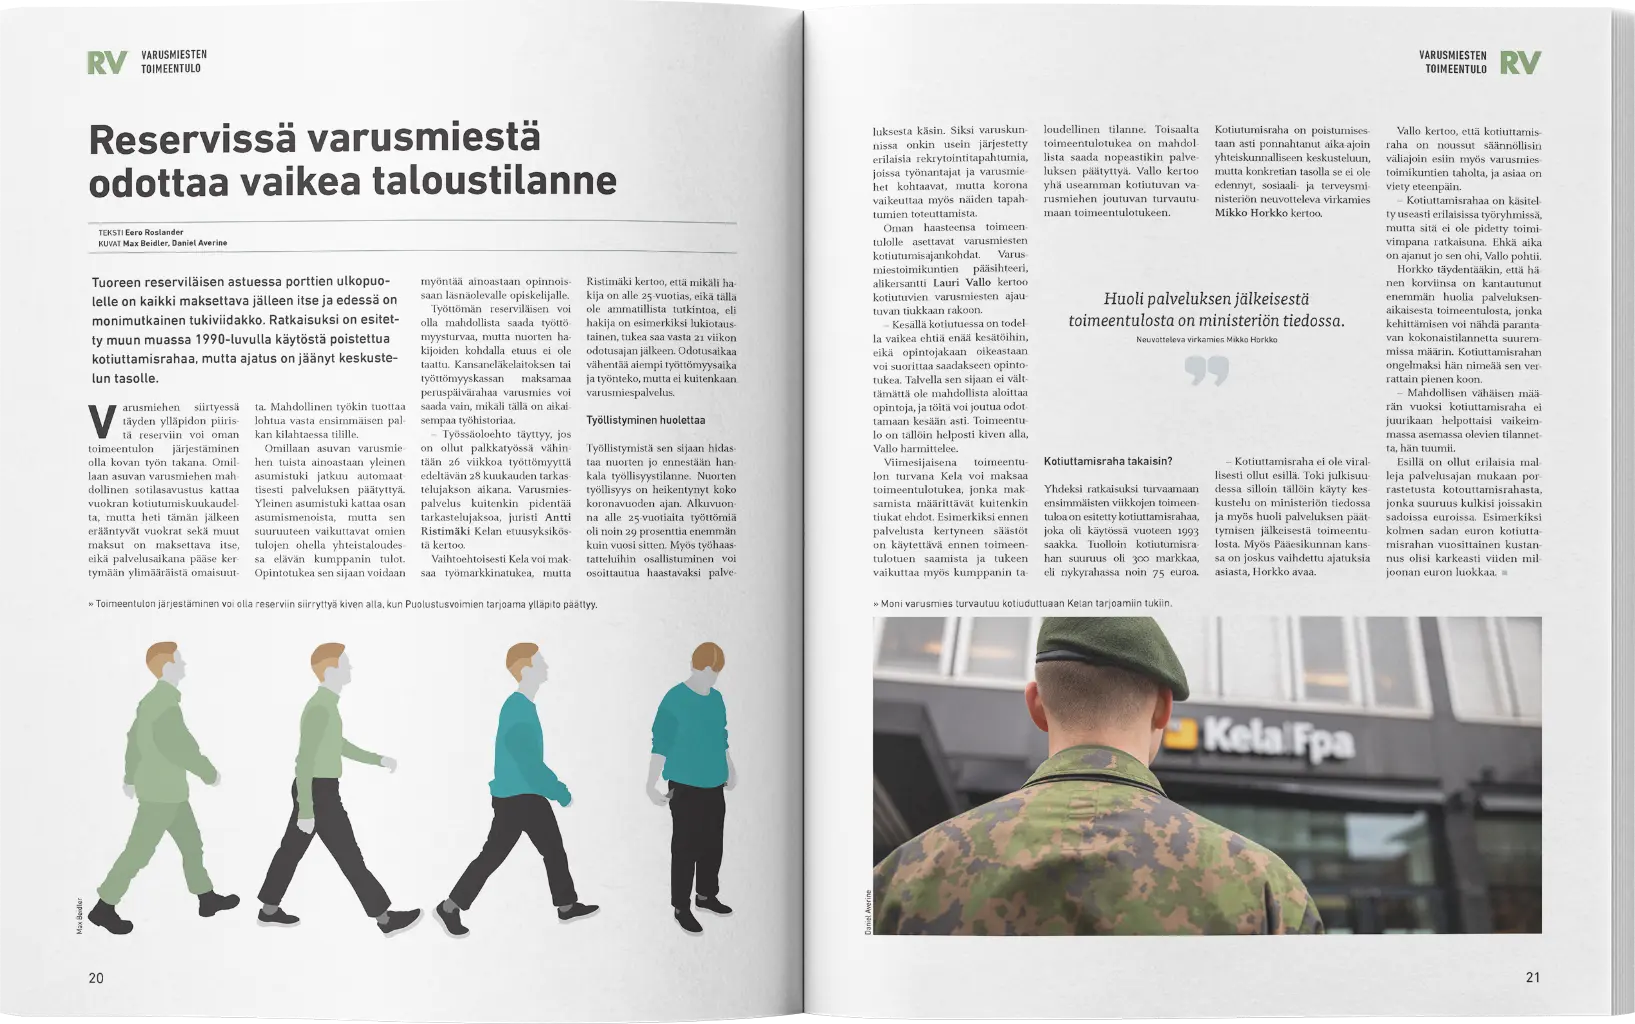 Spread from the 3/21 issue of the Ruotuväki newspaper.